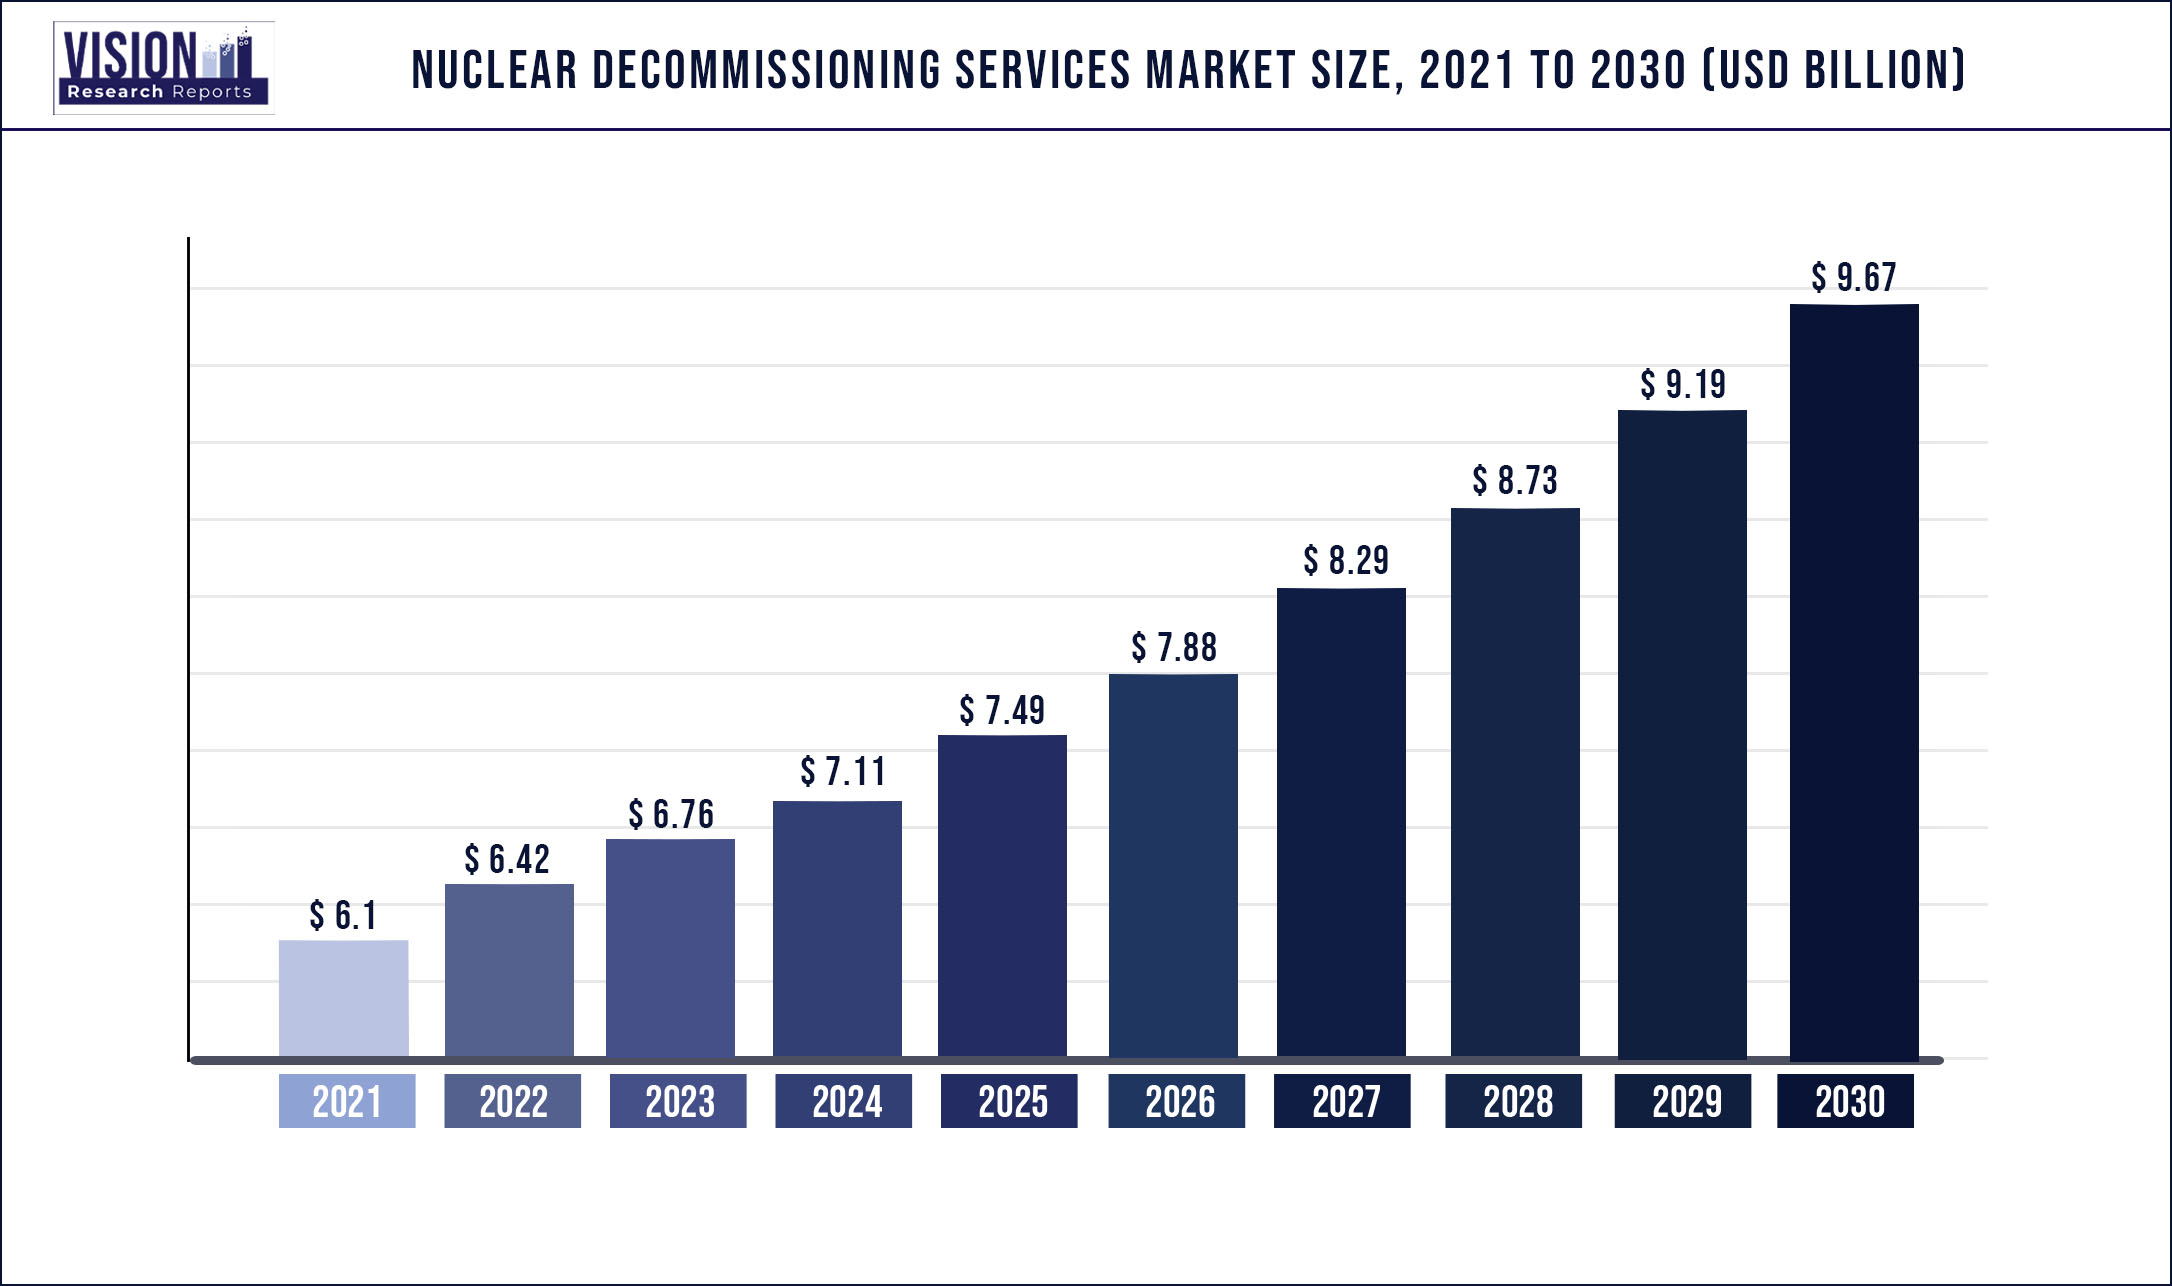 Nuclear Decommissioning Services Market Size 2021 to 2030